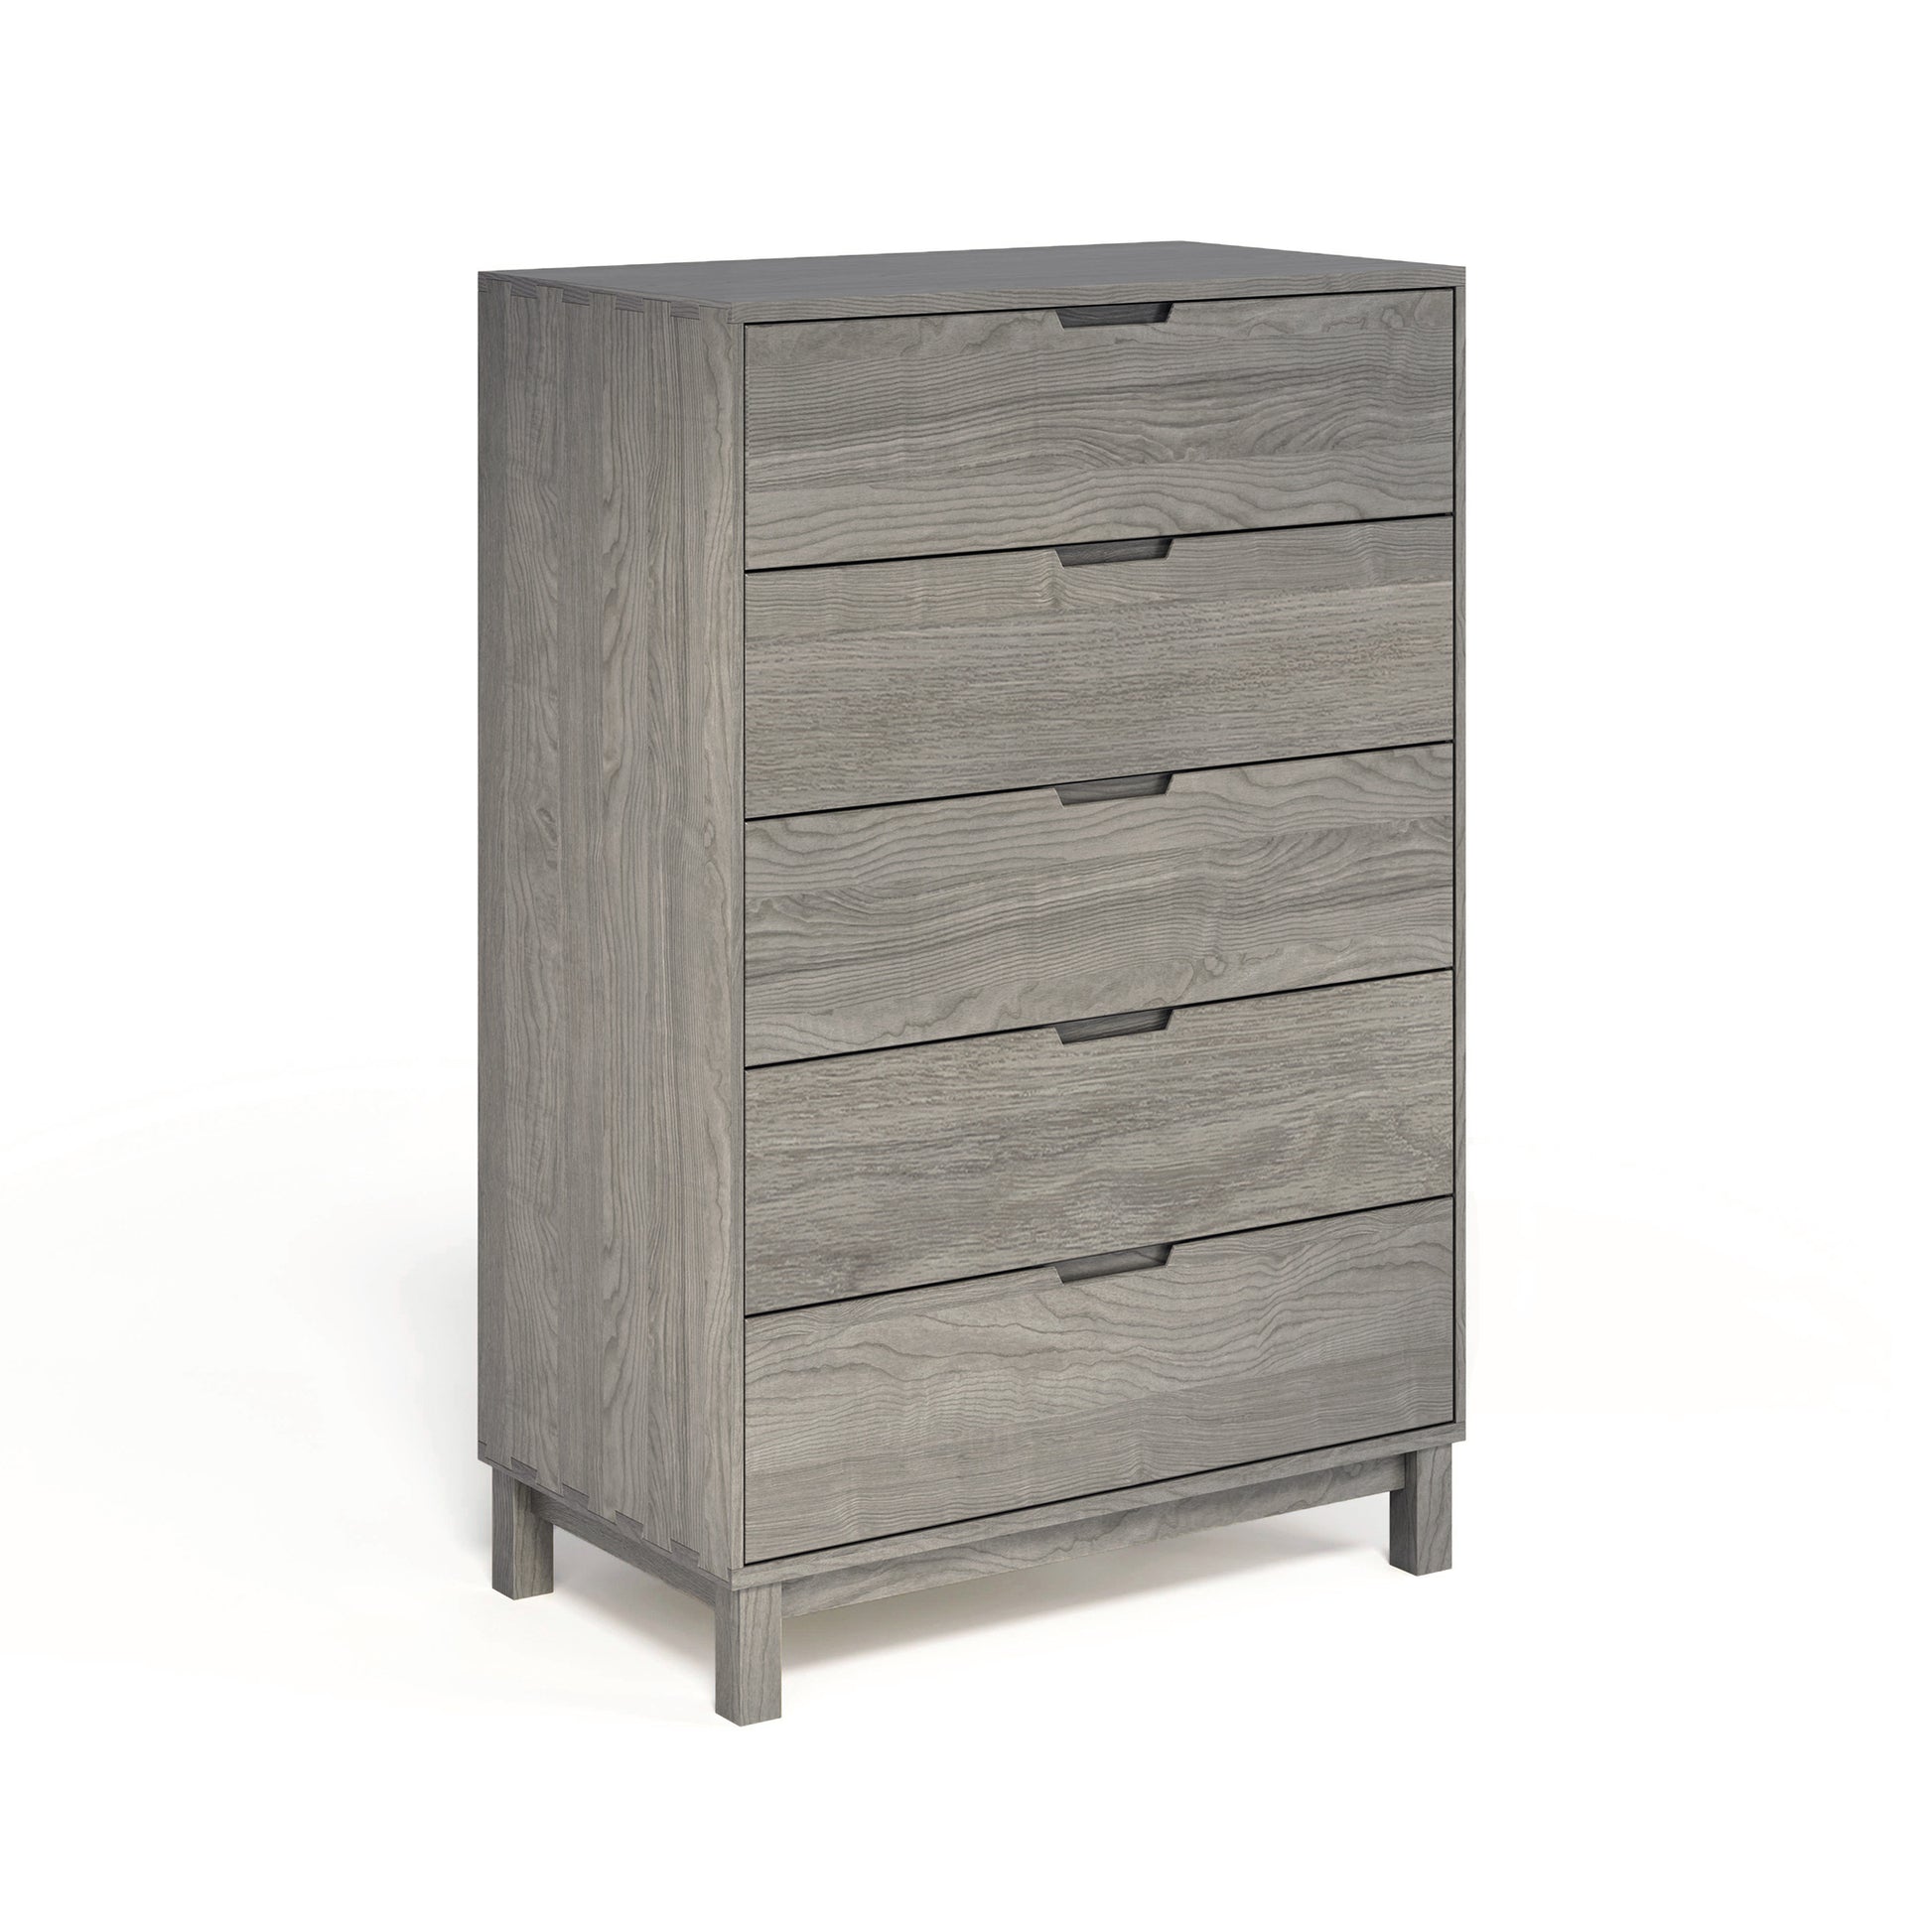 A solid oak hardwood Oslo 5-Drawer Wide Chest from the Copeland Furniture on a plain white background.